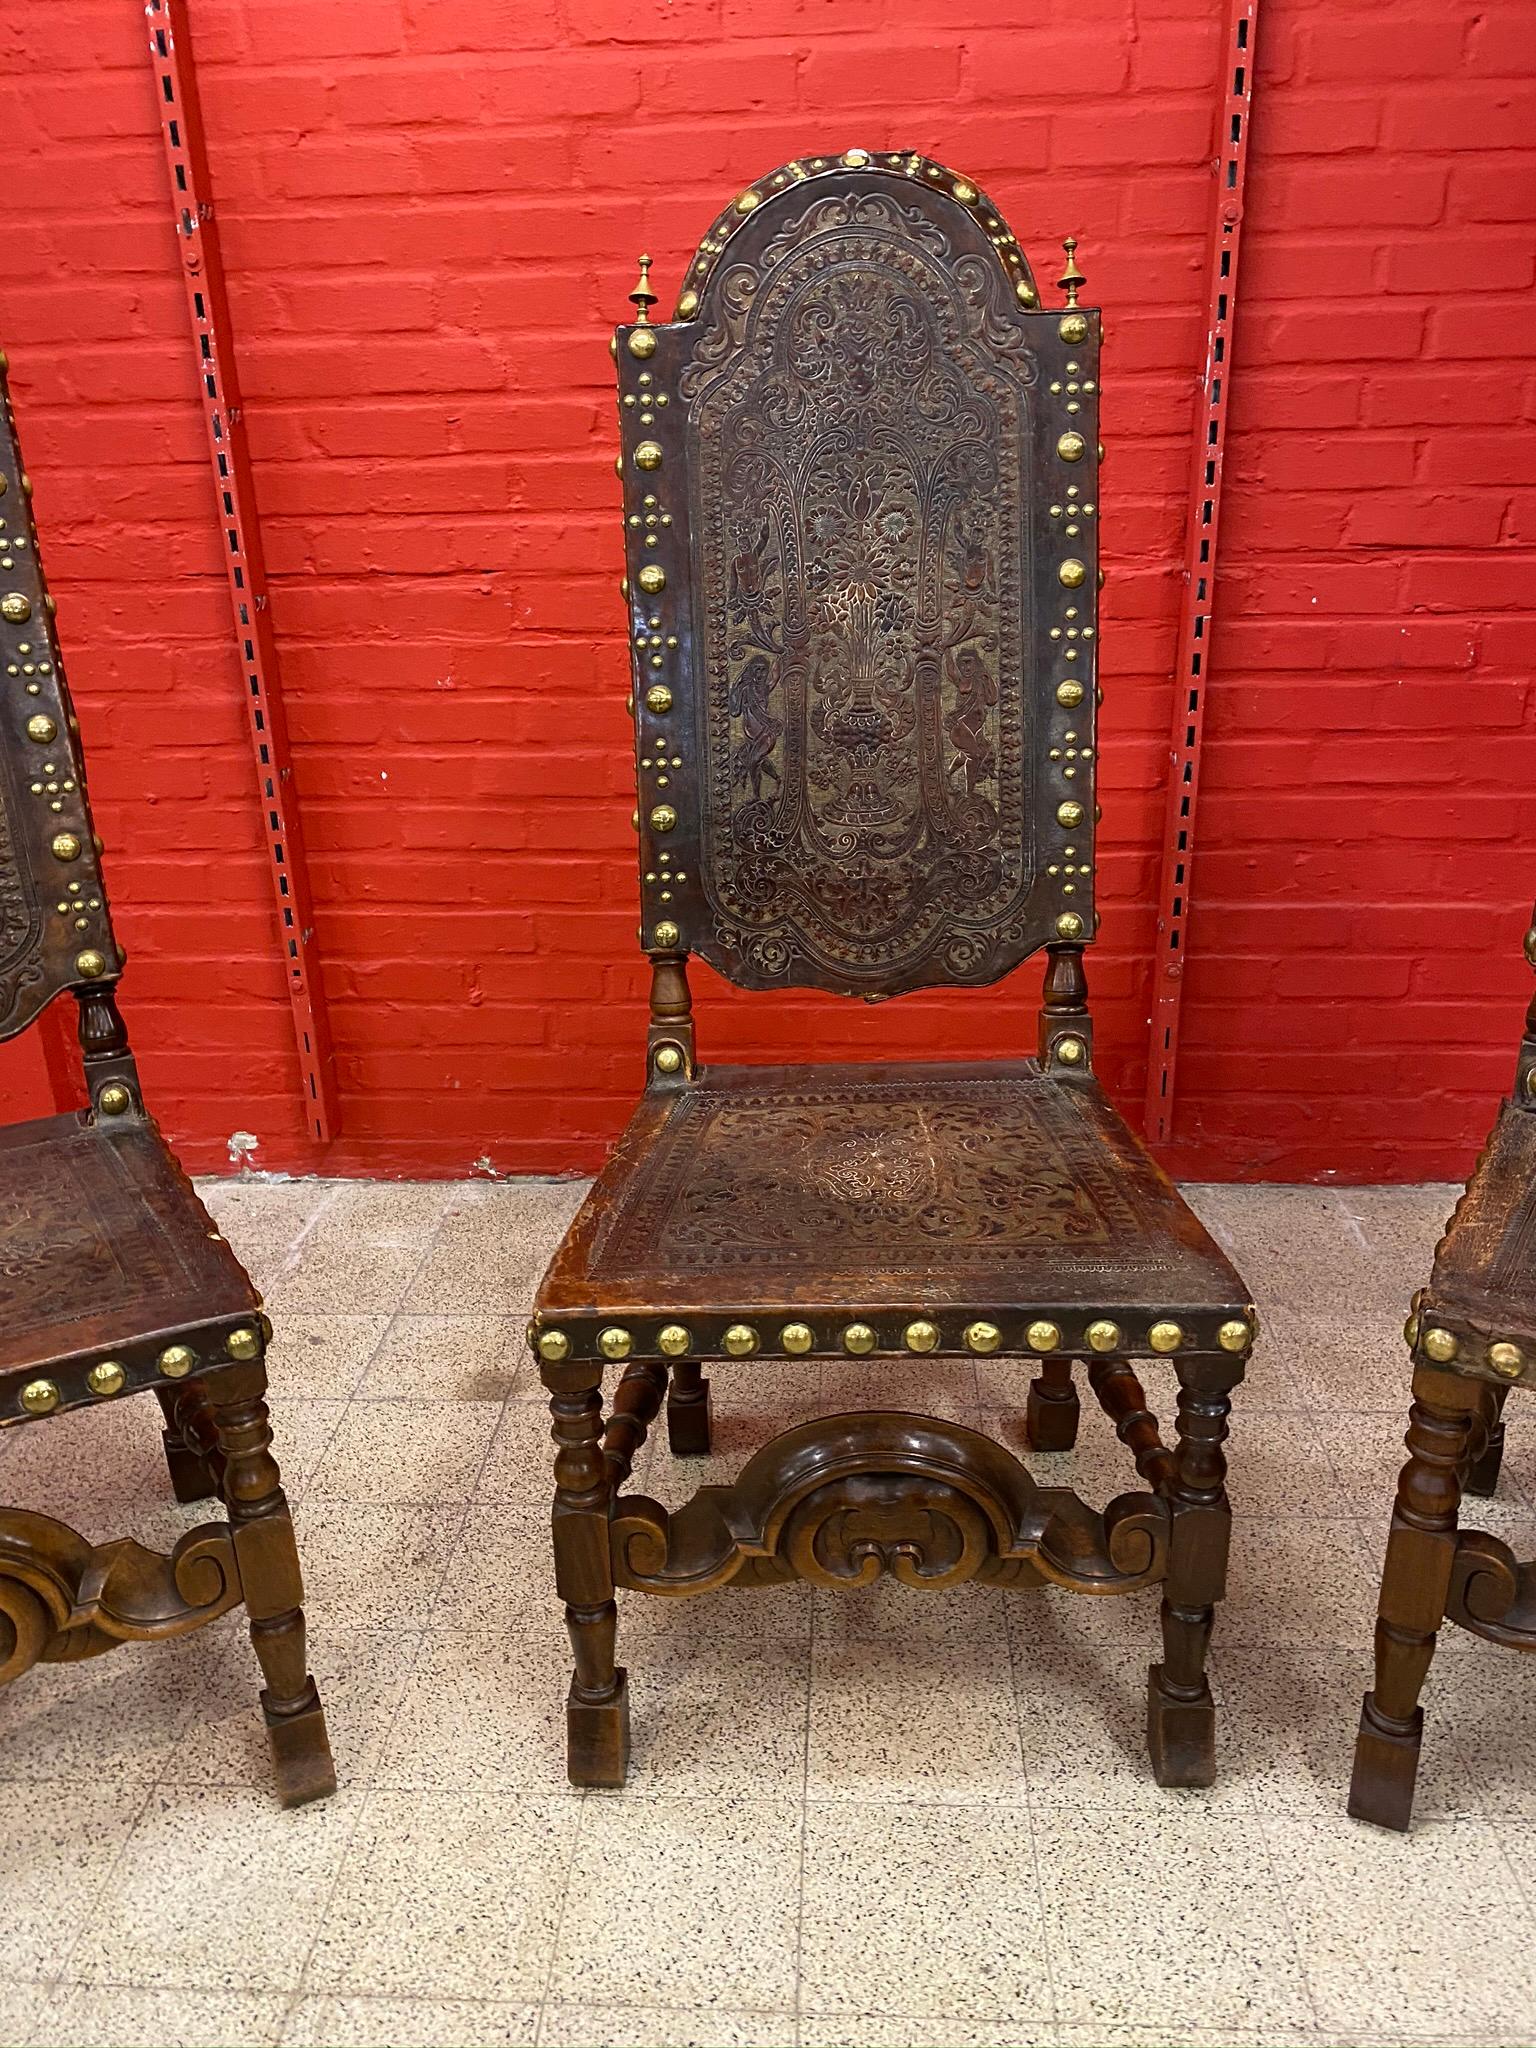 3 High-Backed Chairs, Cordoba Leather Trim with Native American Decor, Spain For Sale 6